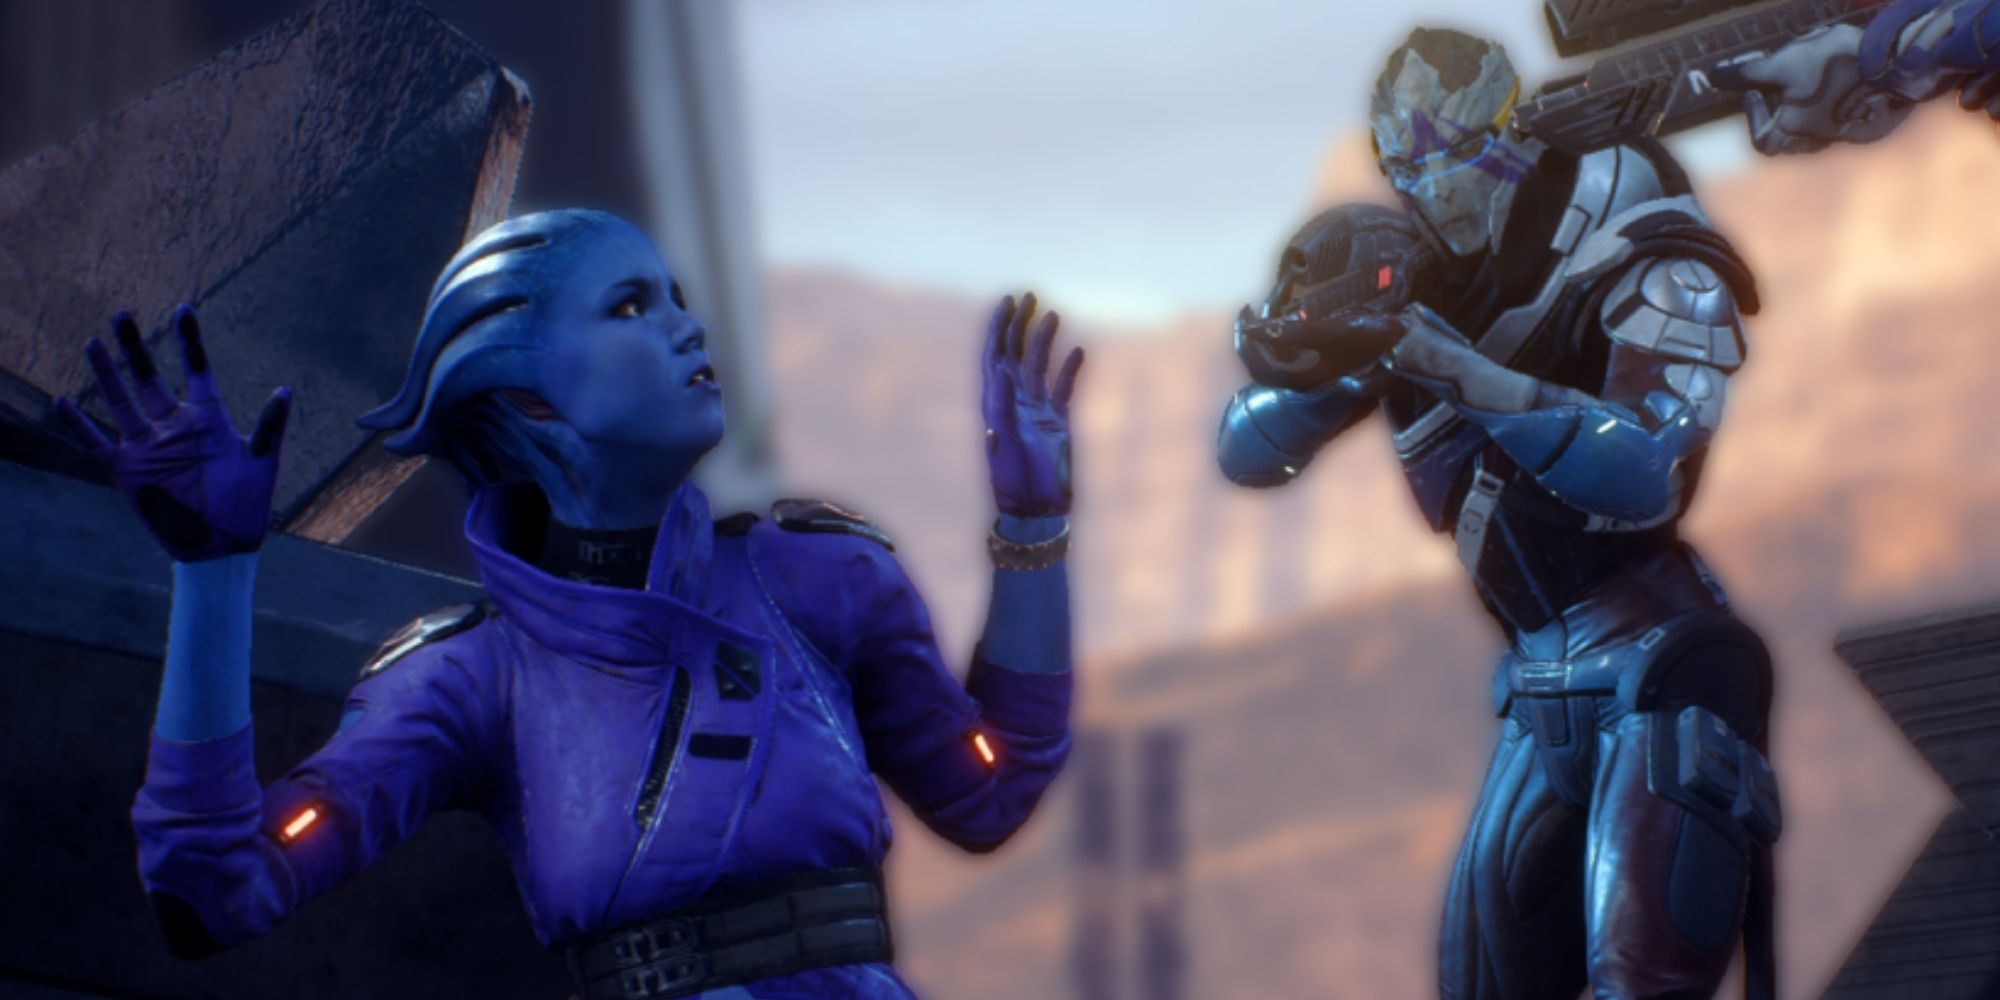 Mass Effect Andromeda - Peebee holding hands up, Vetra pointing gun at her